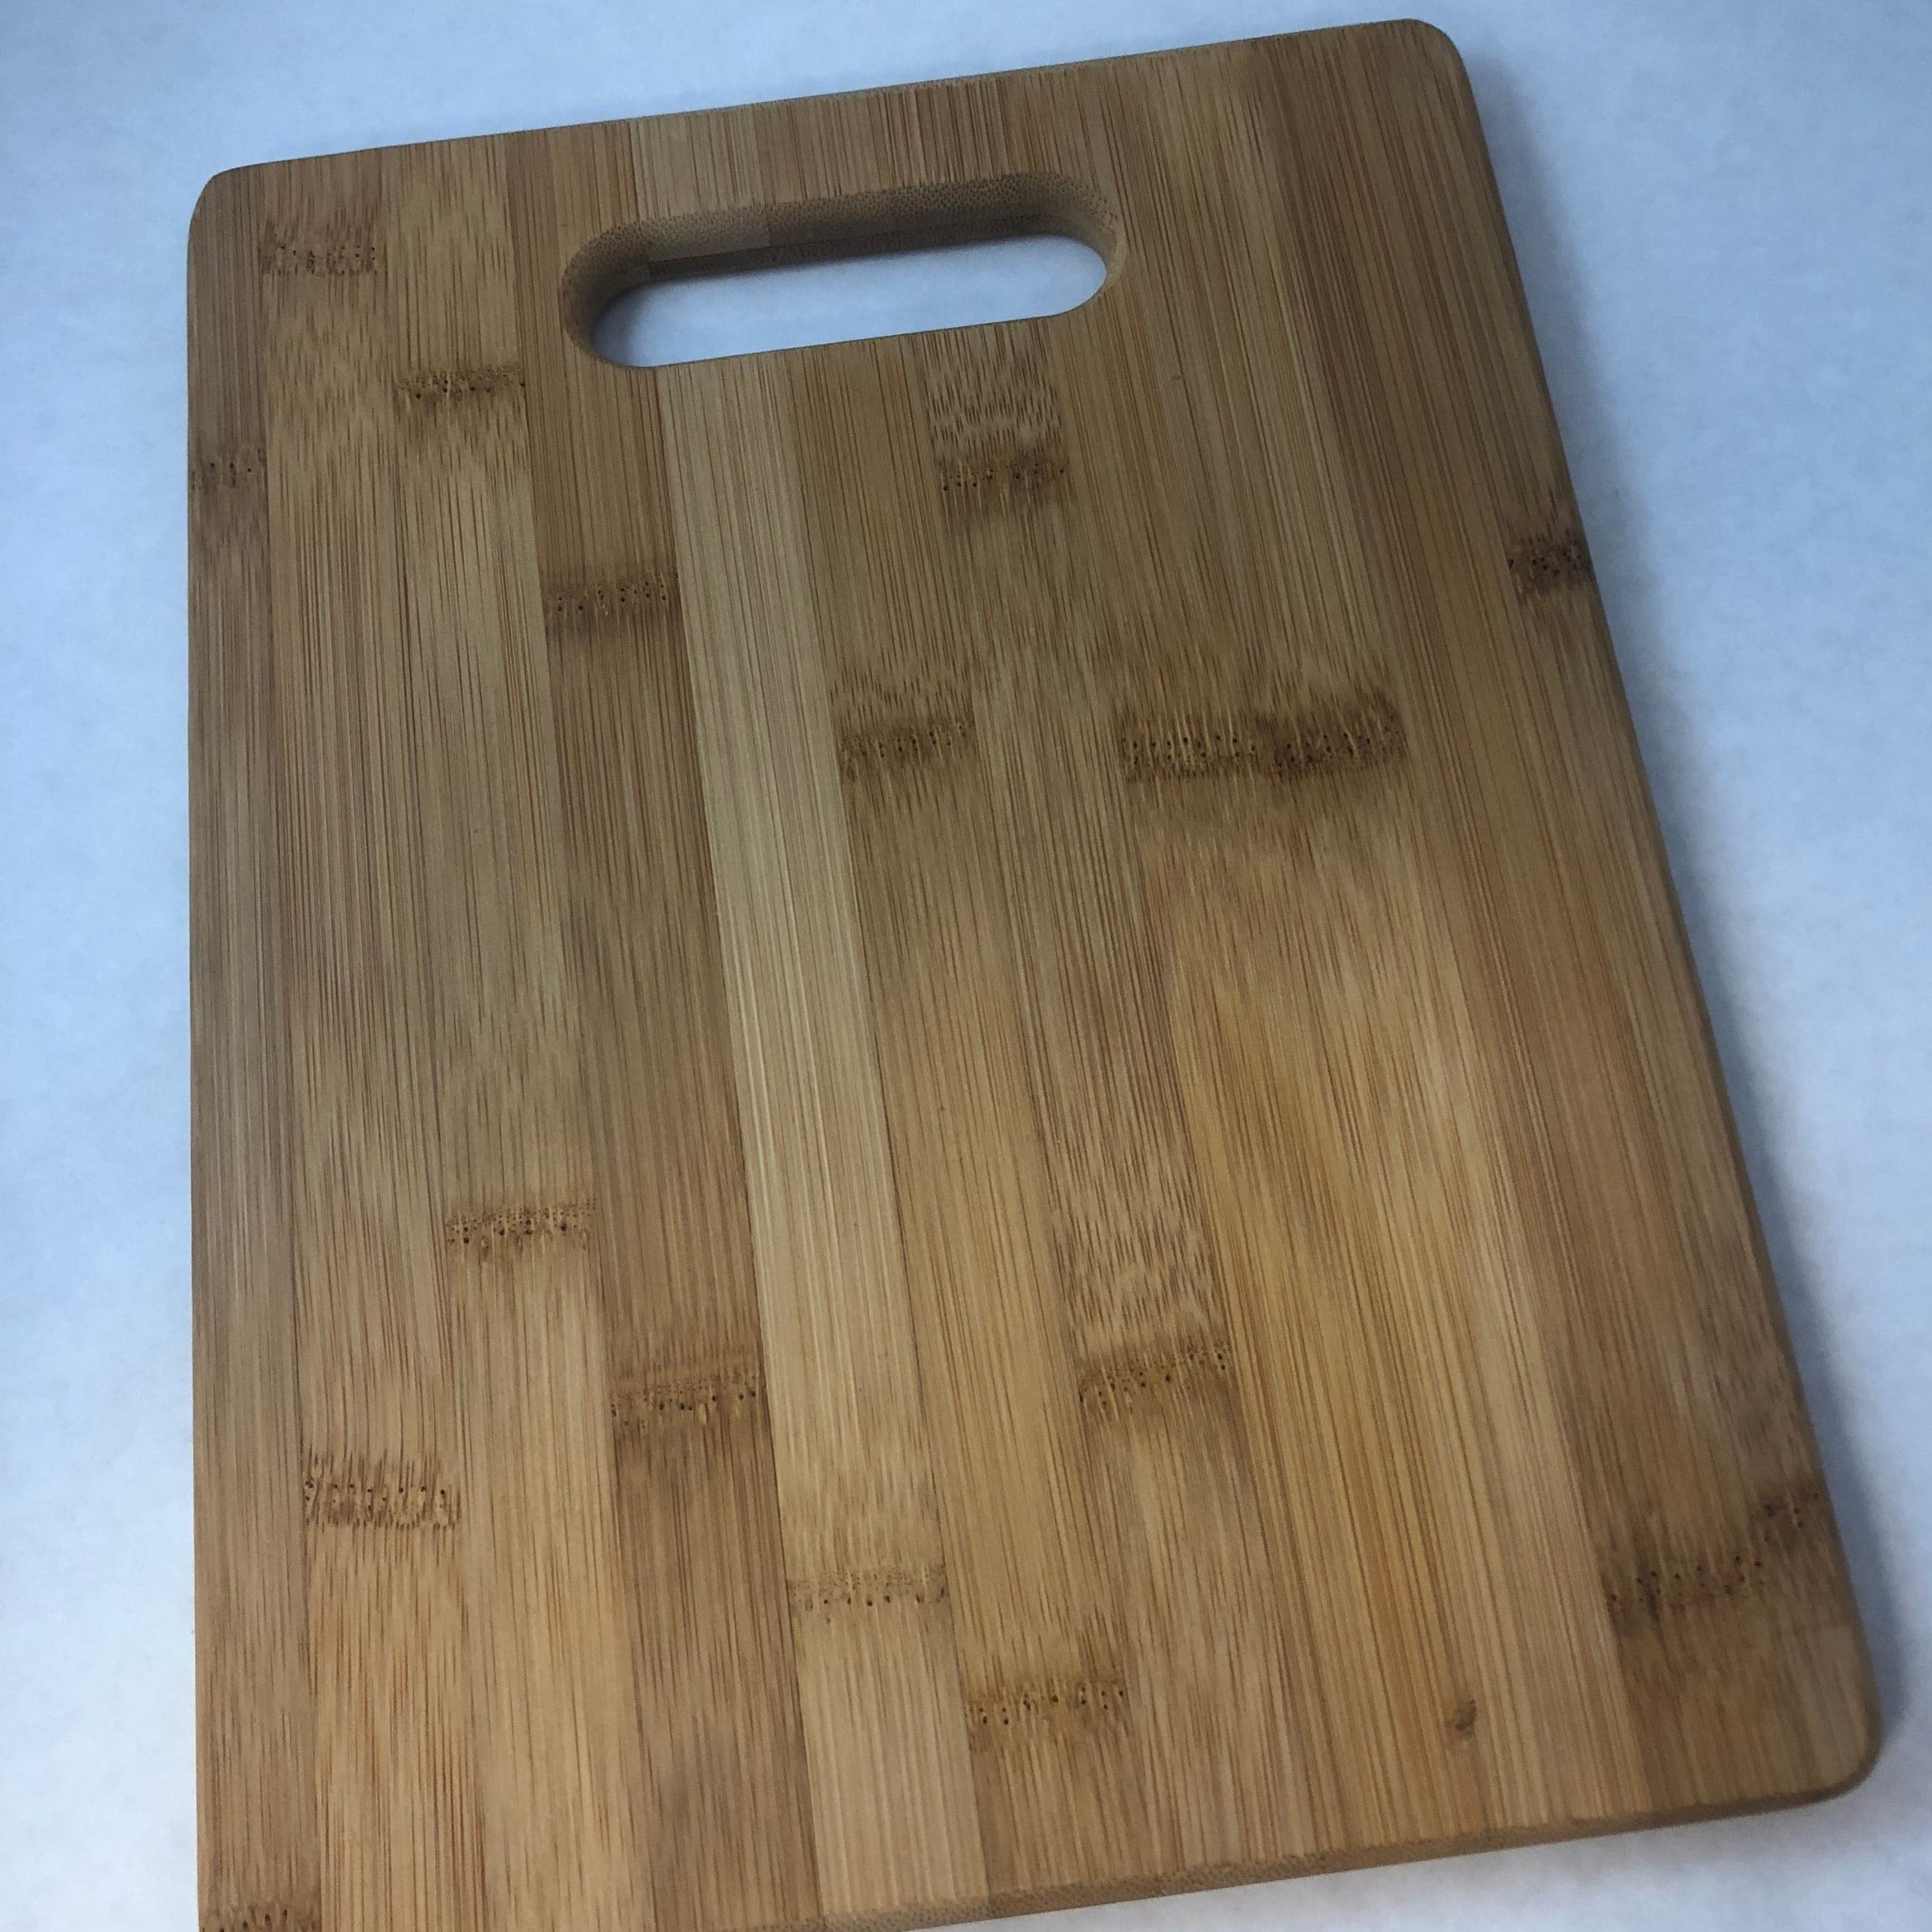 Personalized Mom Cutting Board - Heart Tree Design - Perfect Gift